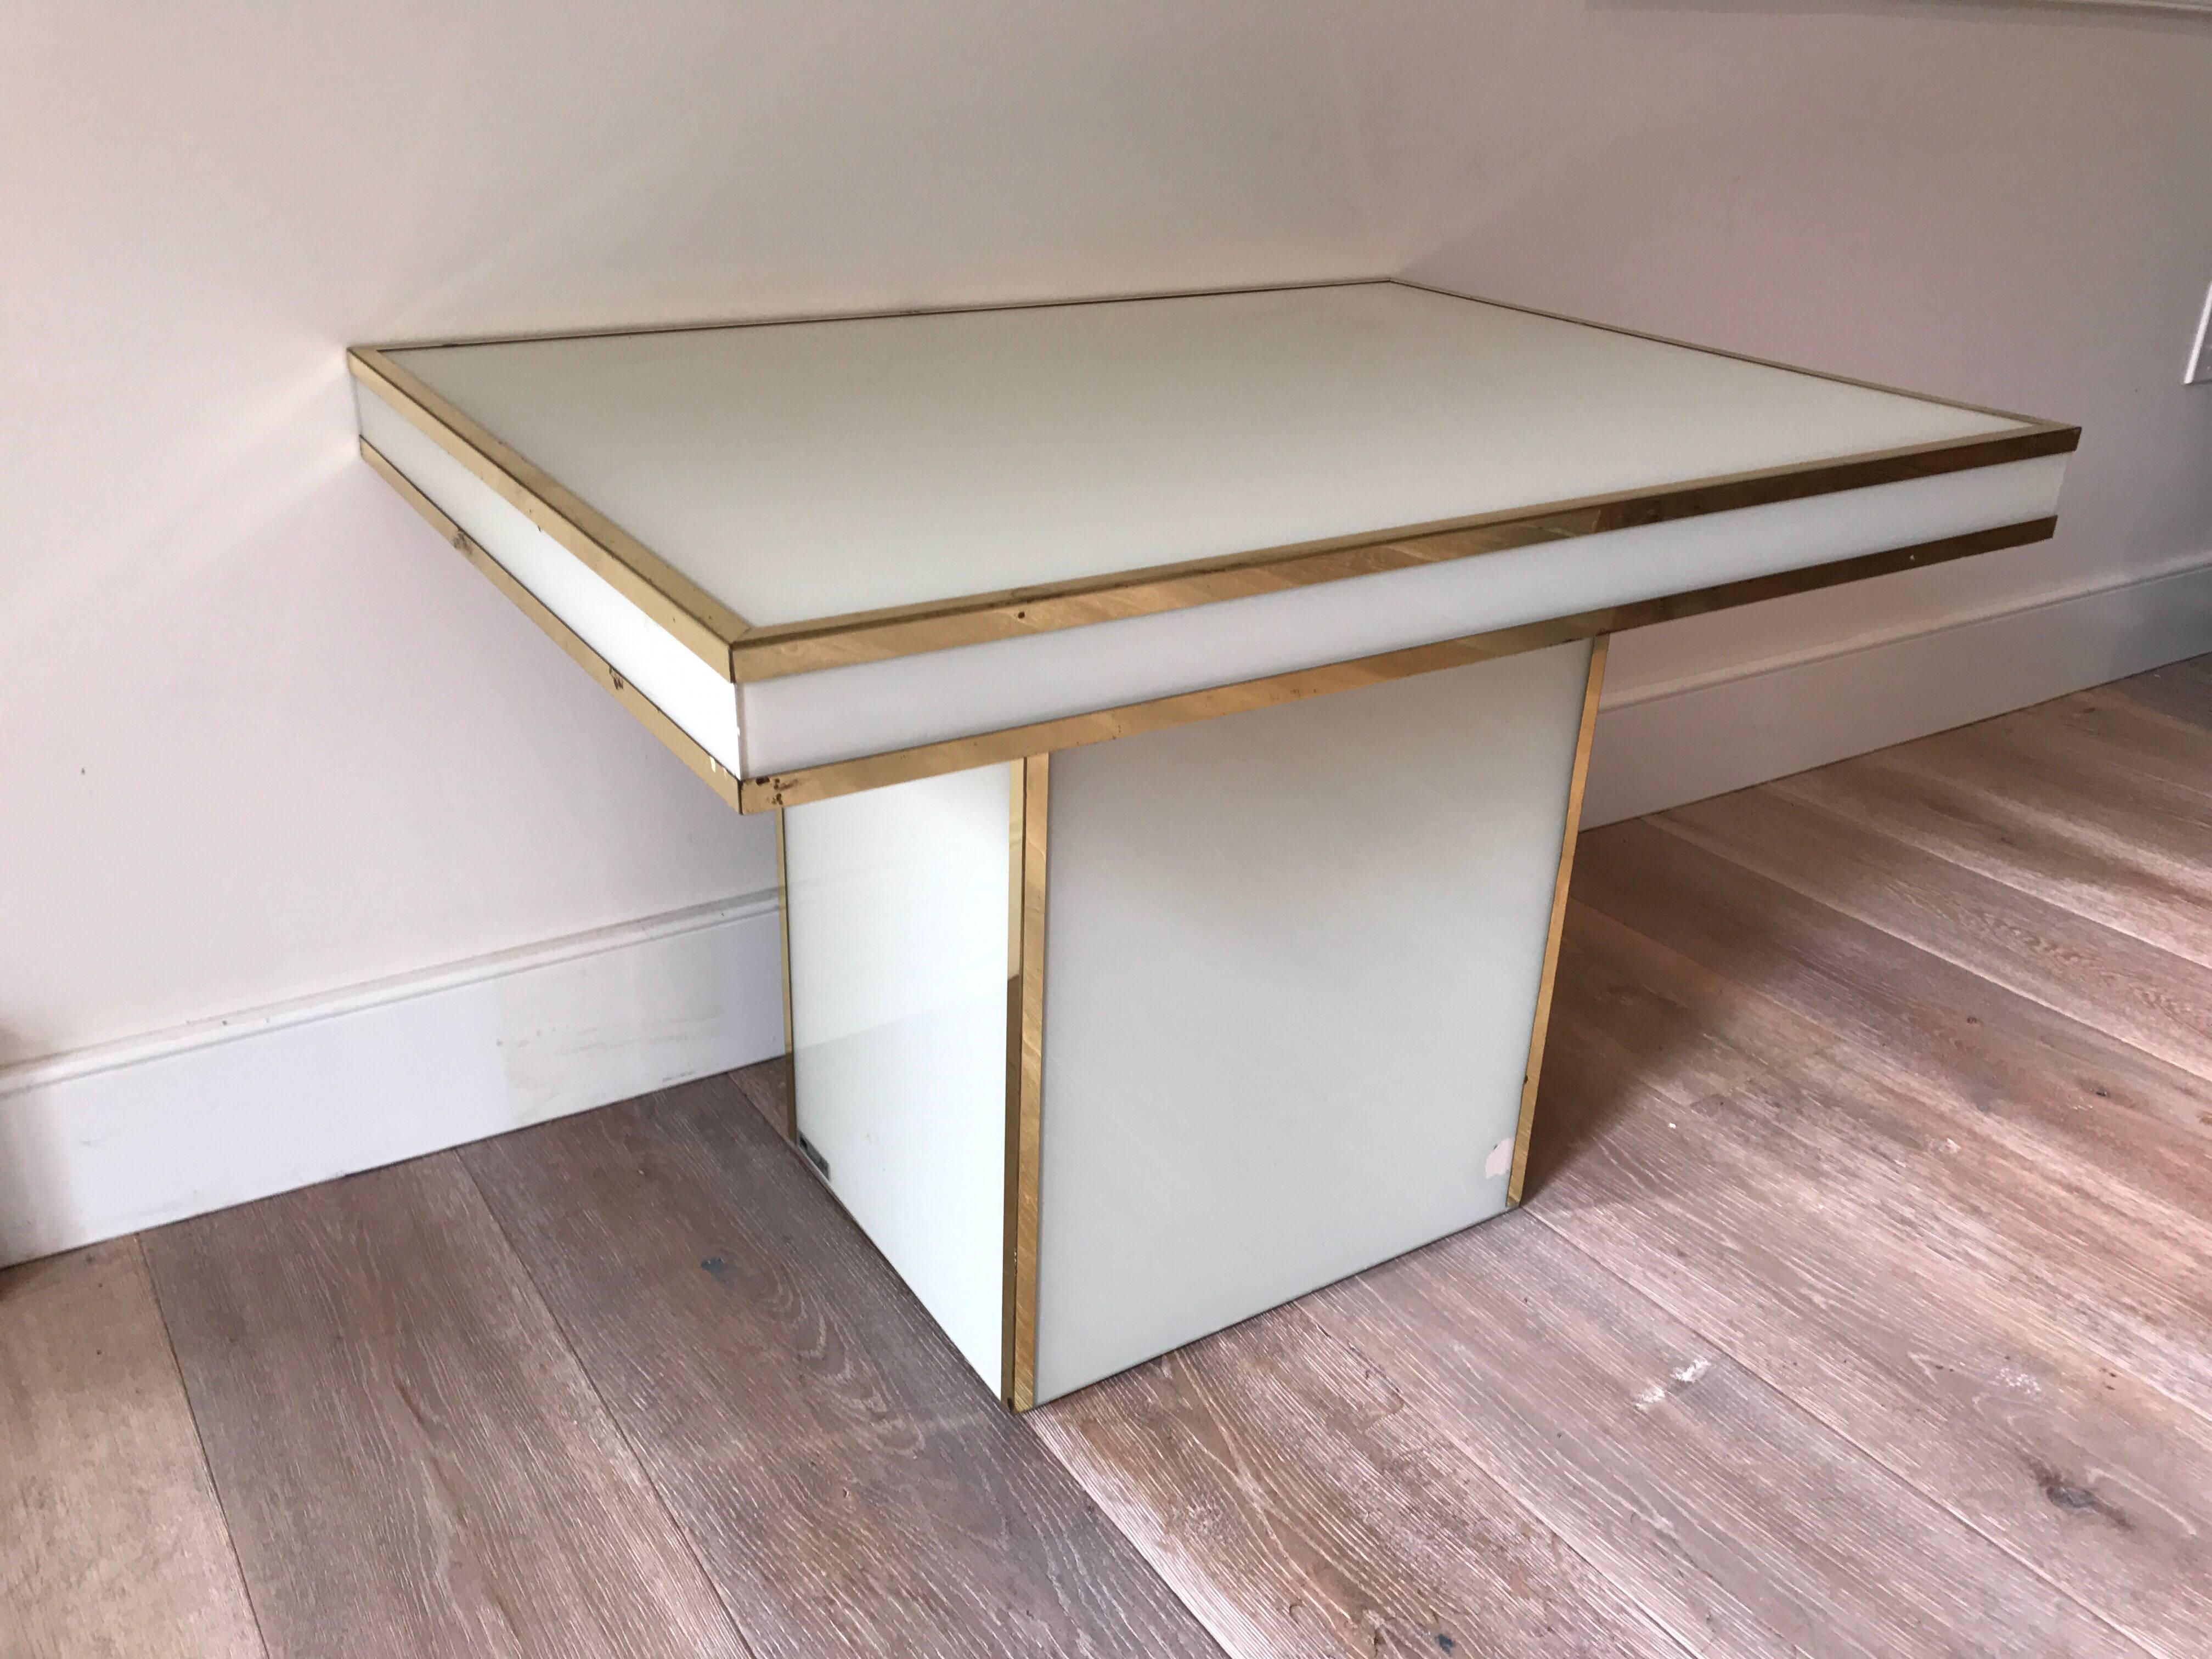 A rectangular low table by Rougier. White glass surround and brass seams.